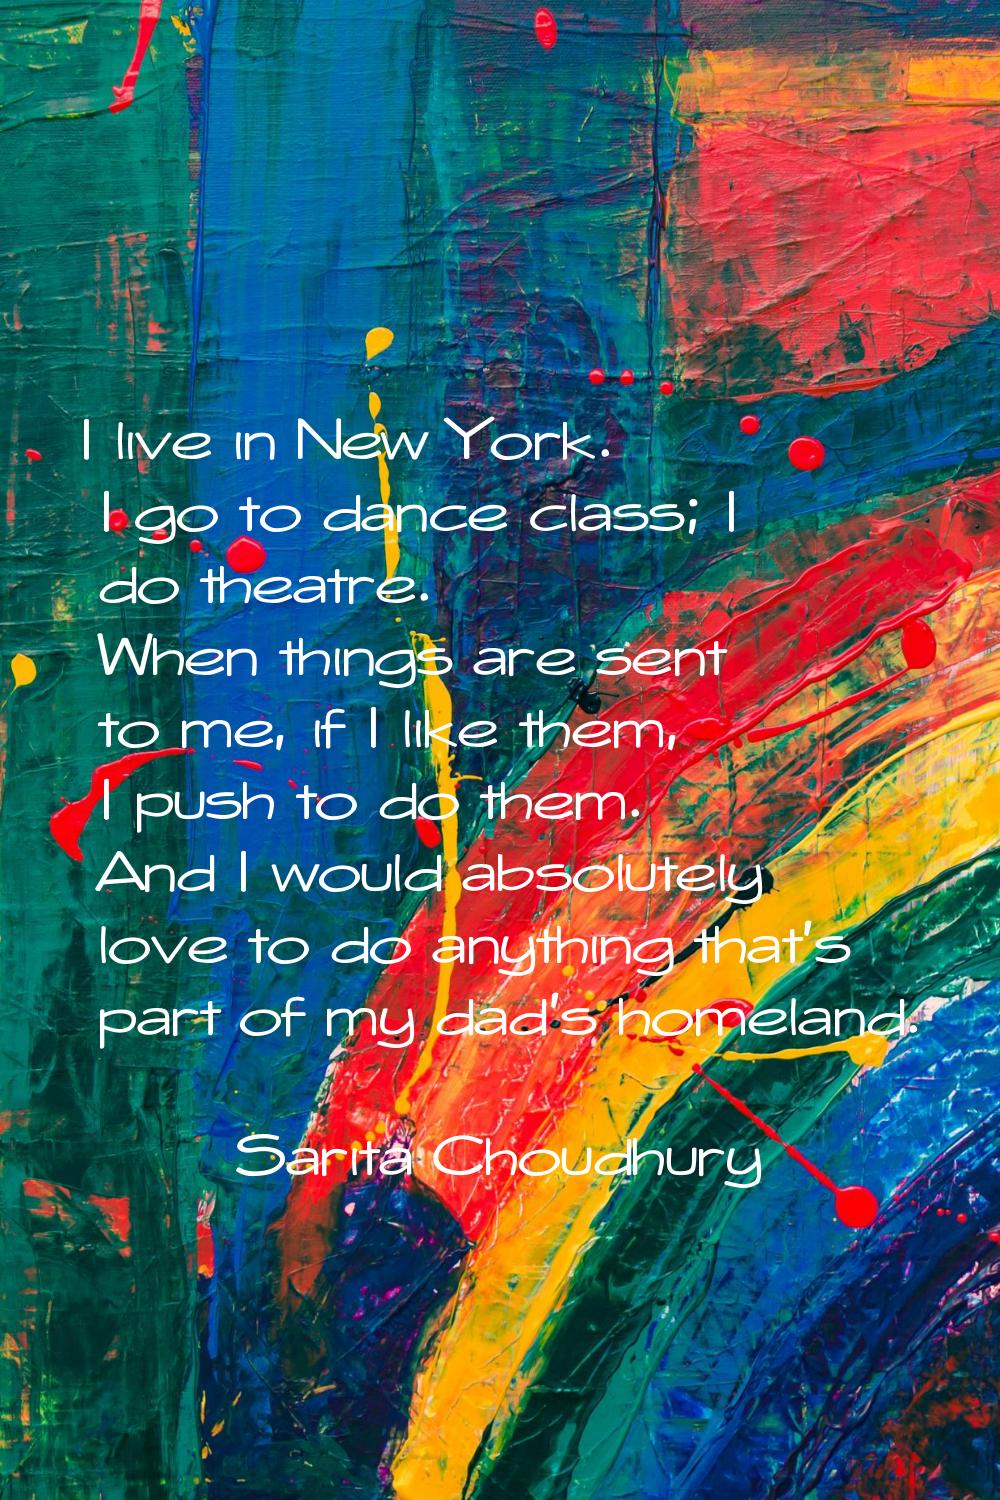 I live in New York. I go to dance class; I do theatre. When things are sent to me, if I like them, 